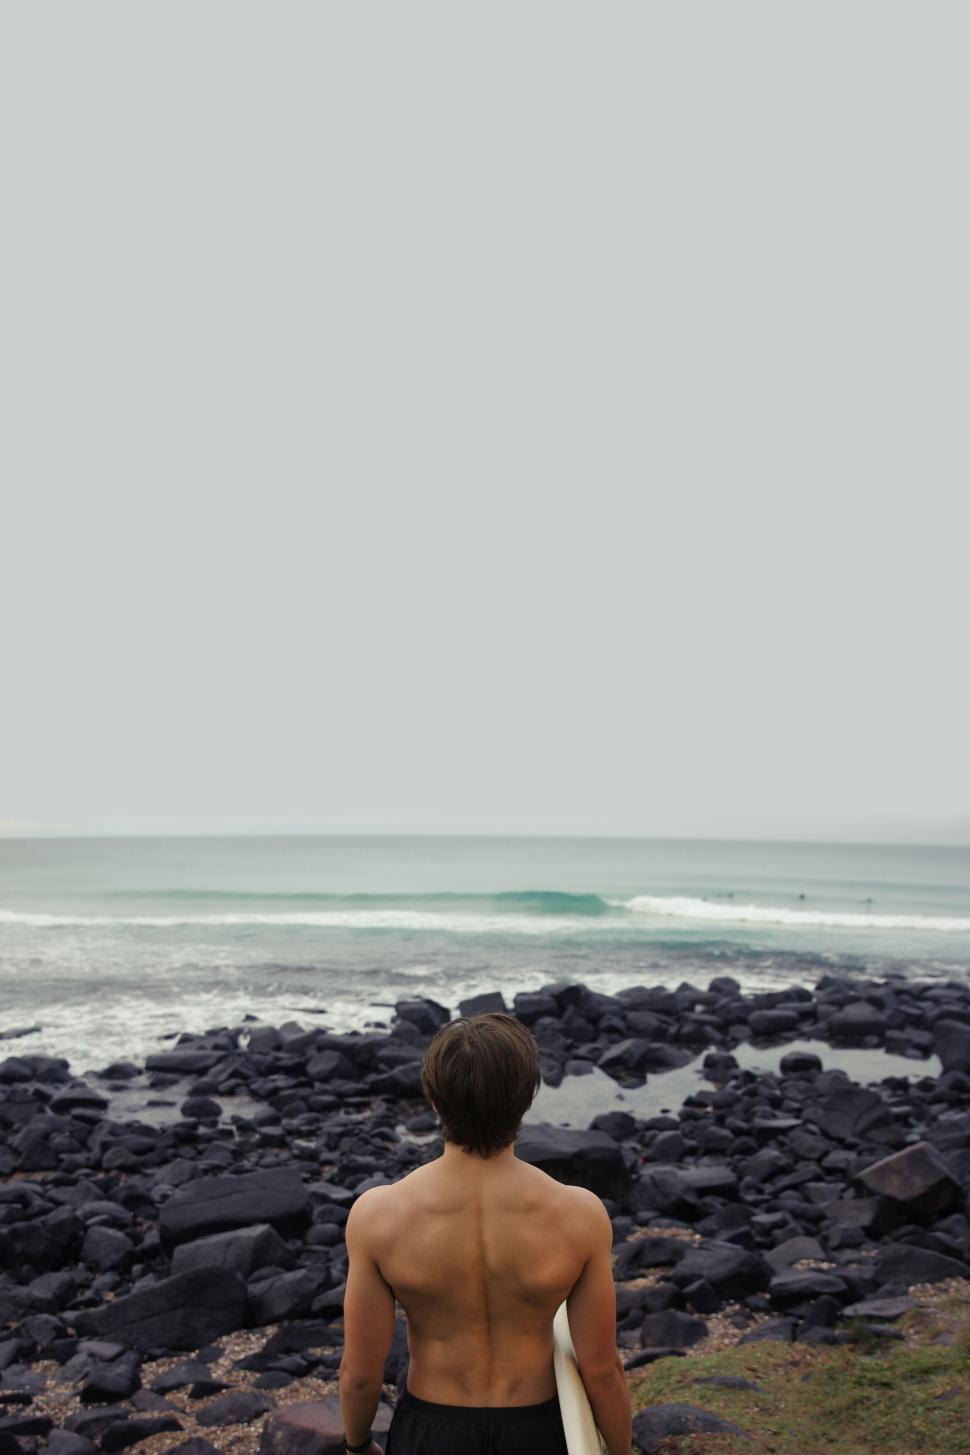 Free Image of Surfer contemplating the waves 